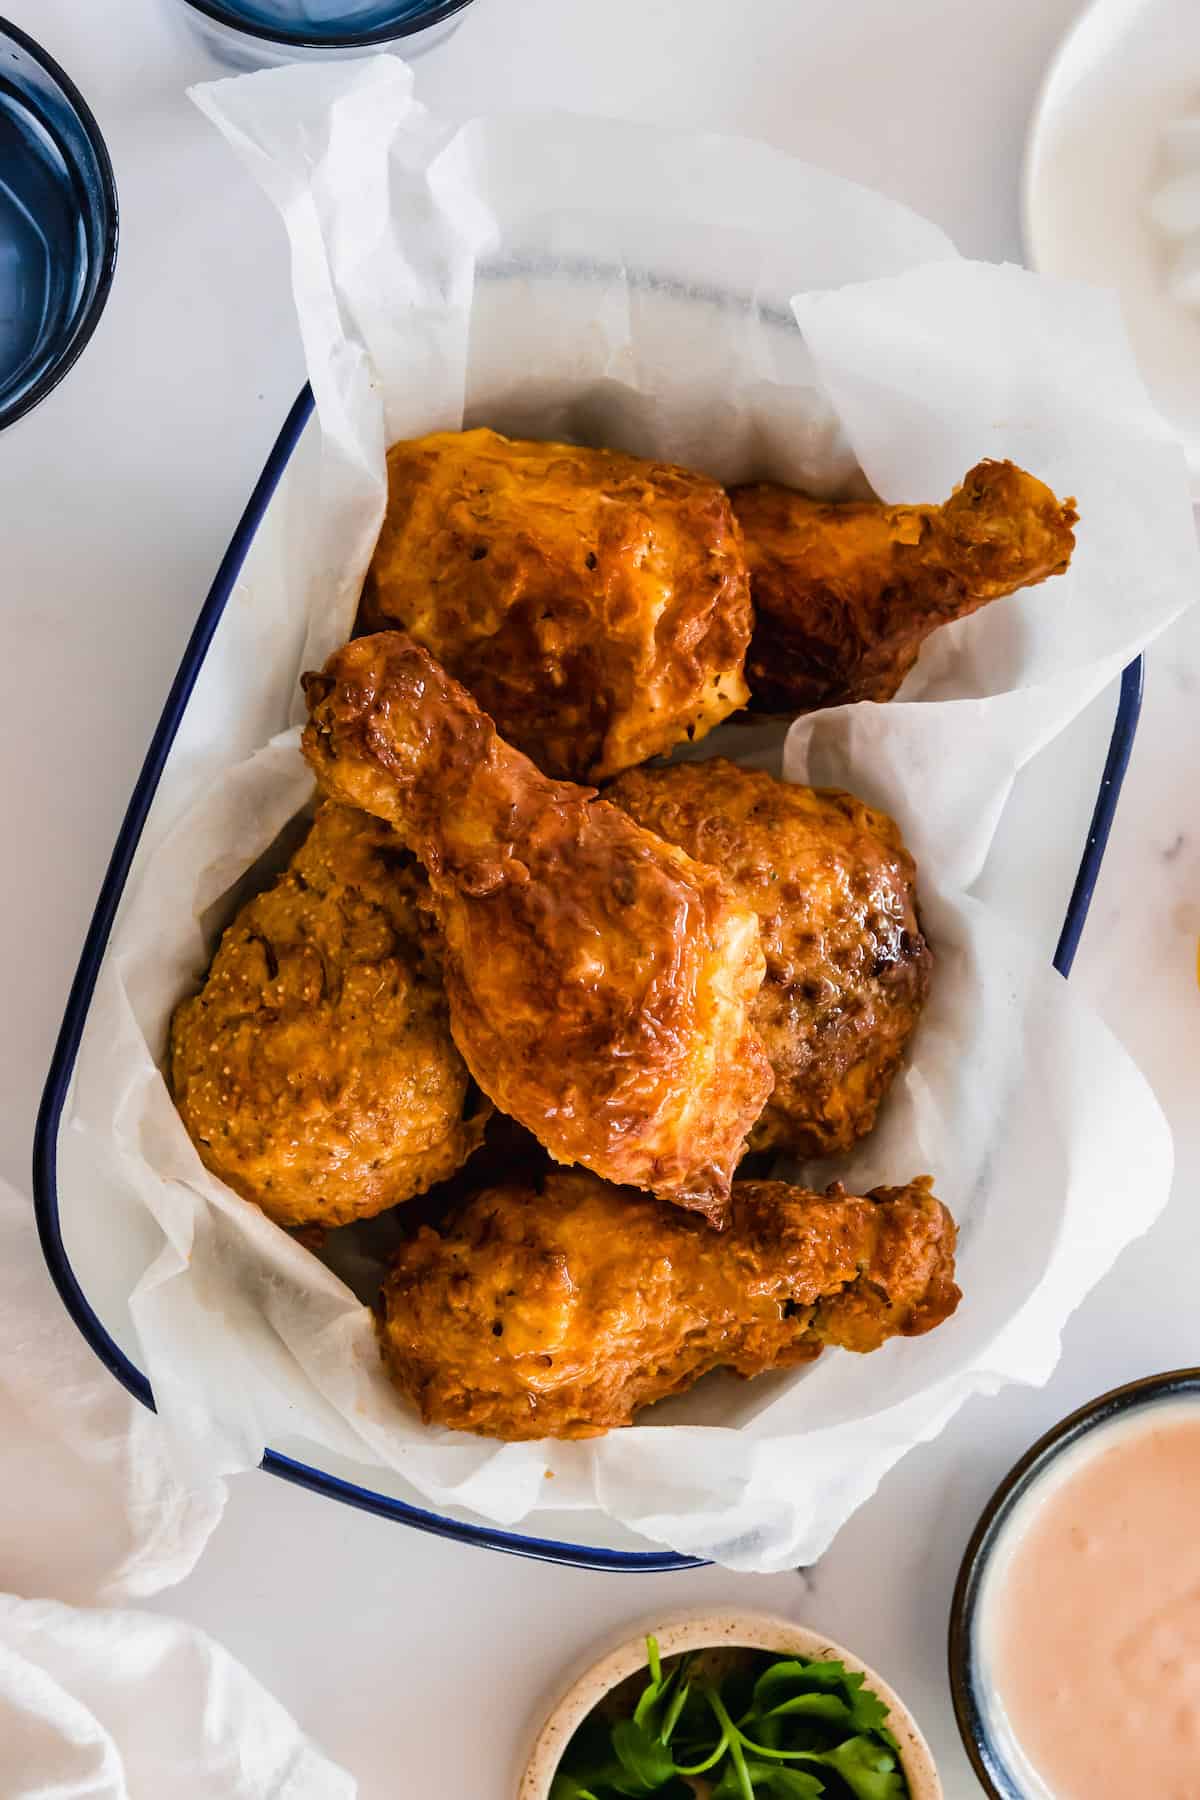 A Bowl of Gluten-Free Fried Chicken with a Parchment Liner Between the Bowl and the Meat